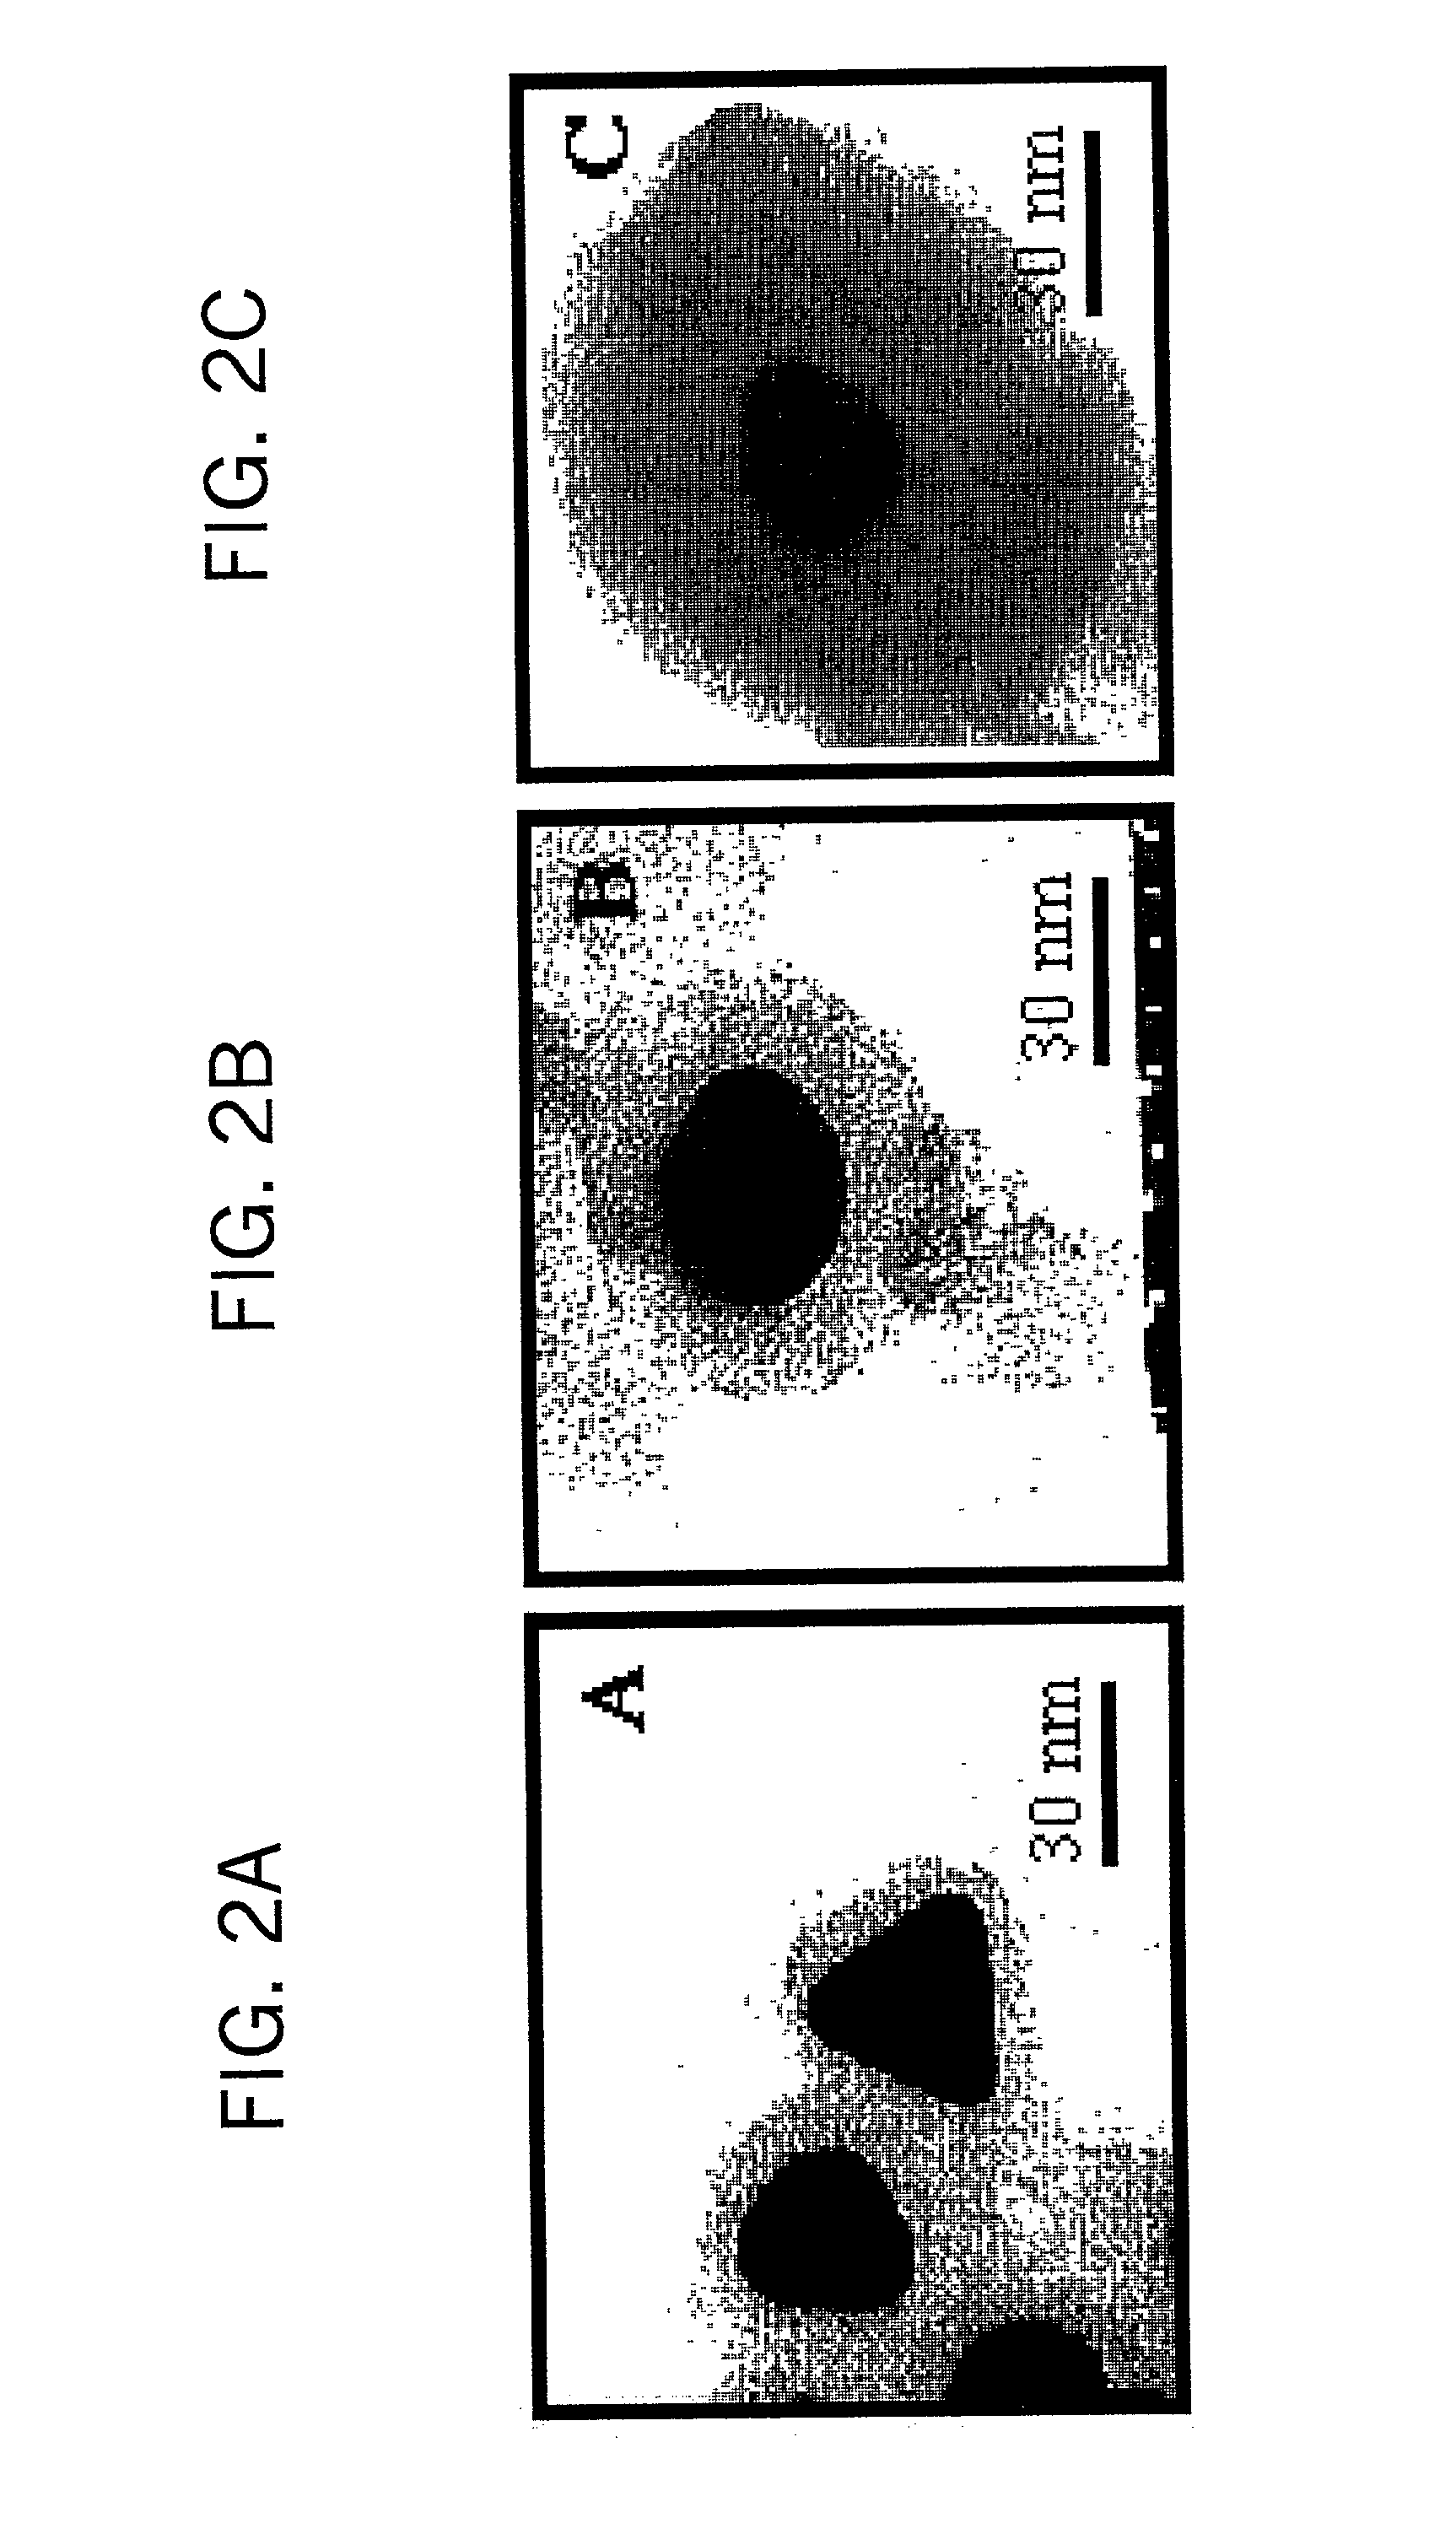 Nanoparticle composites and nanocapsules for guest encapsulation and methods for synthesizing same